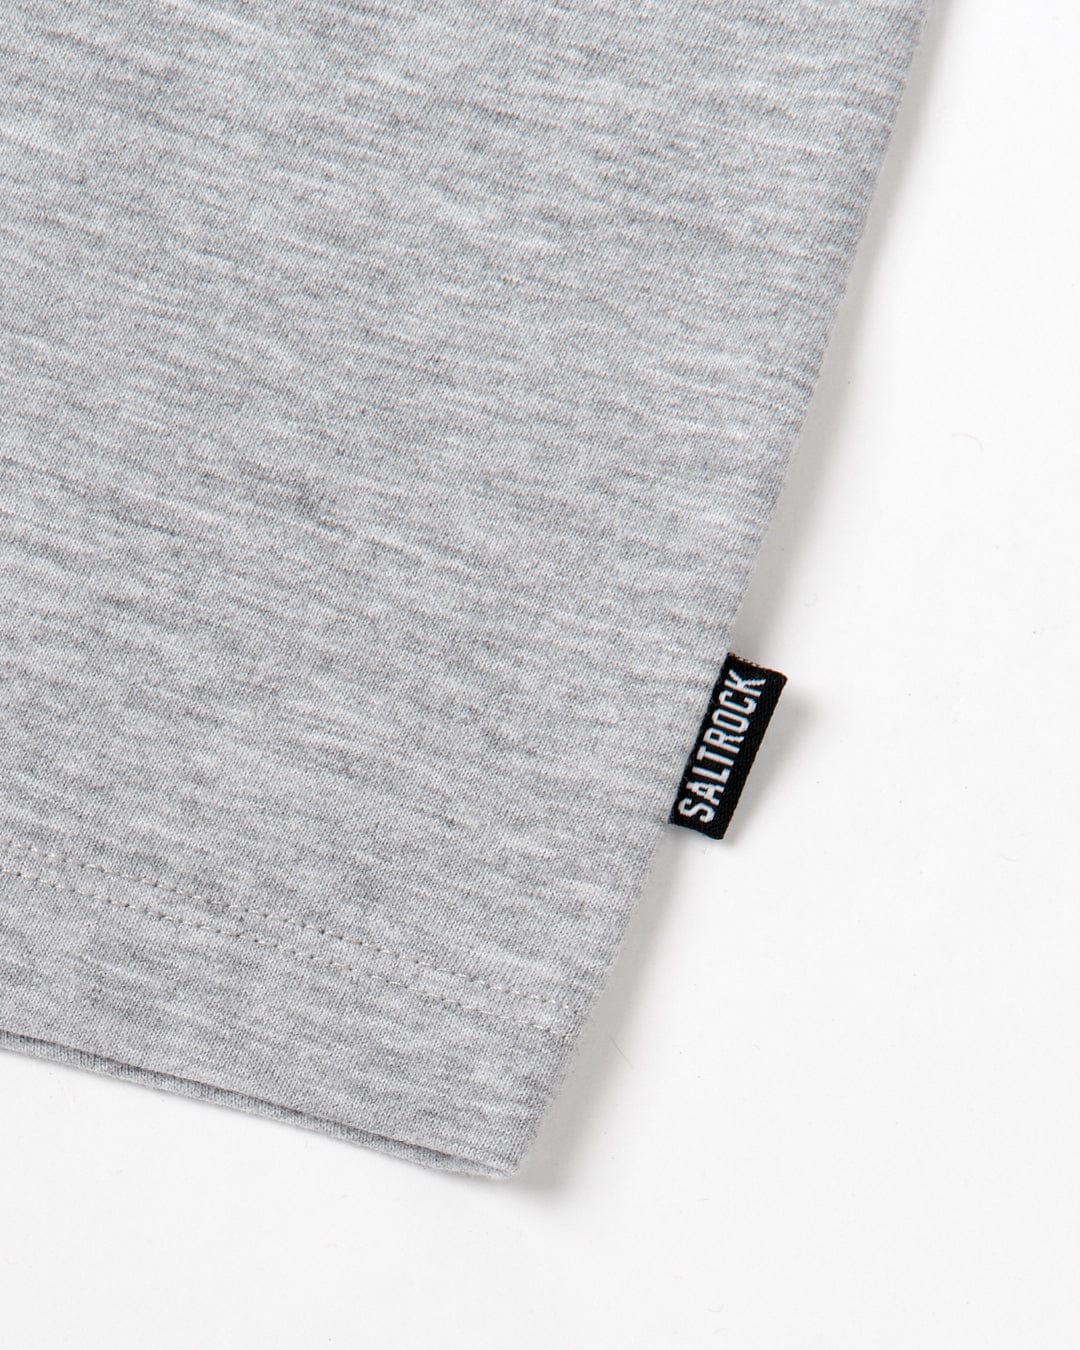 Close-up of a gray Velator - Womens Short Sleeve T-Shirt - Grey Marl with a black Saltrock tag stitched on the edge.